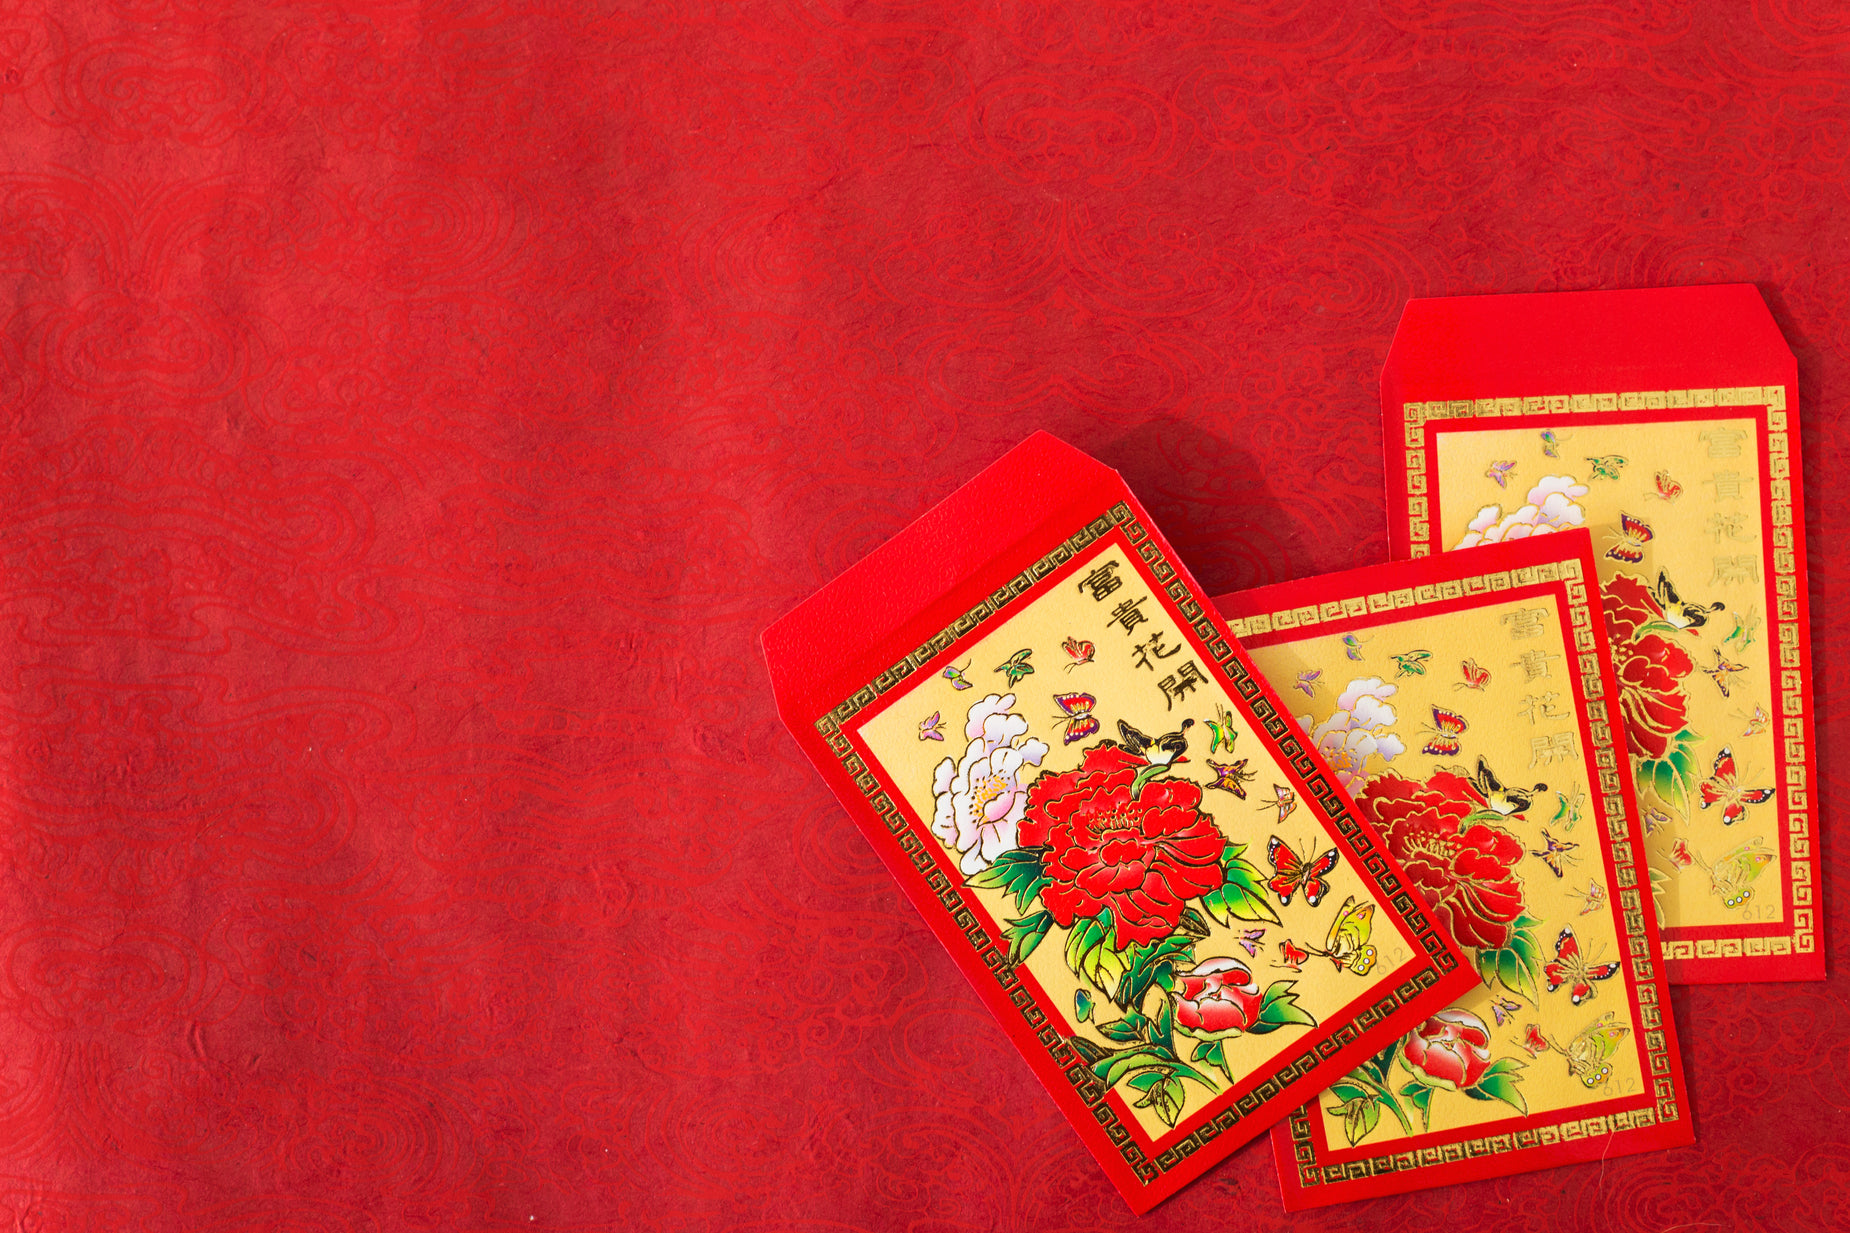 three red envelopes that are in the shape of flowers on a red background